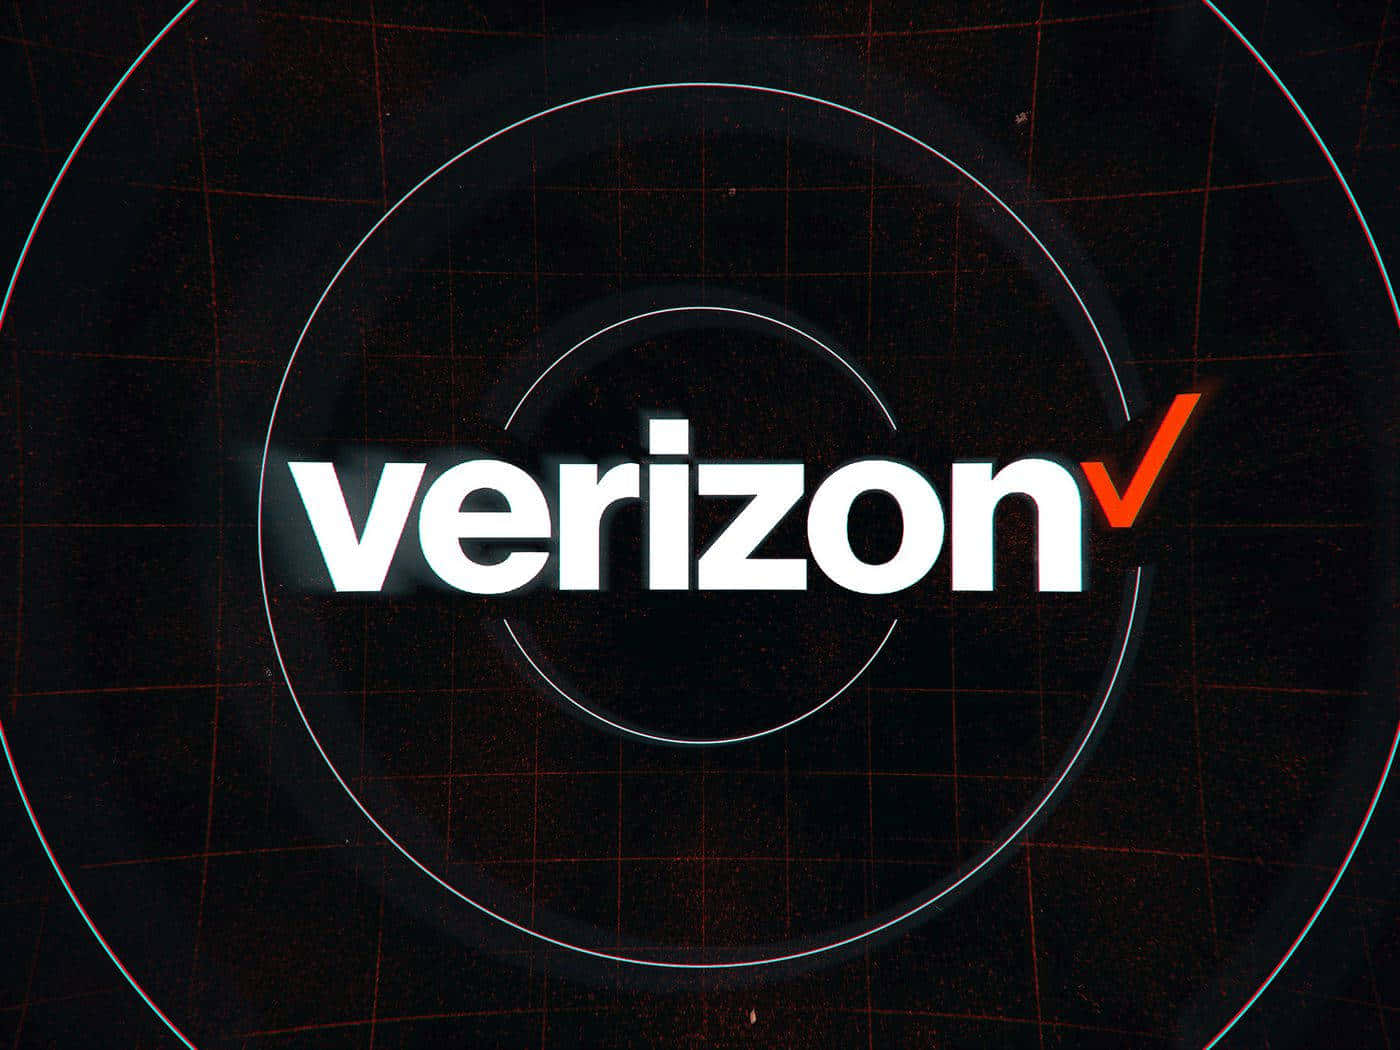 Stay connected with Verizon for reliable speed and service